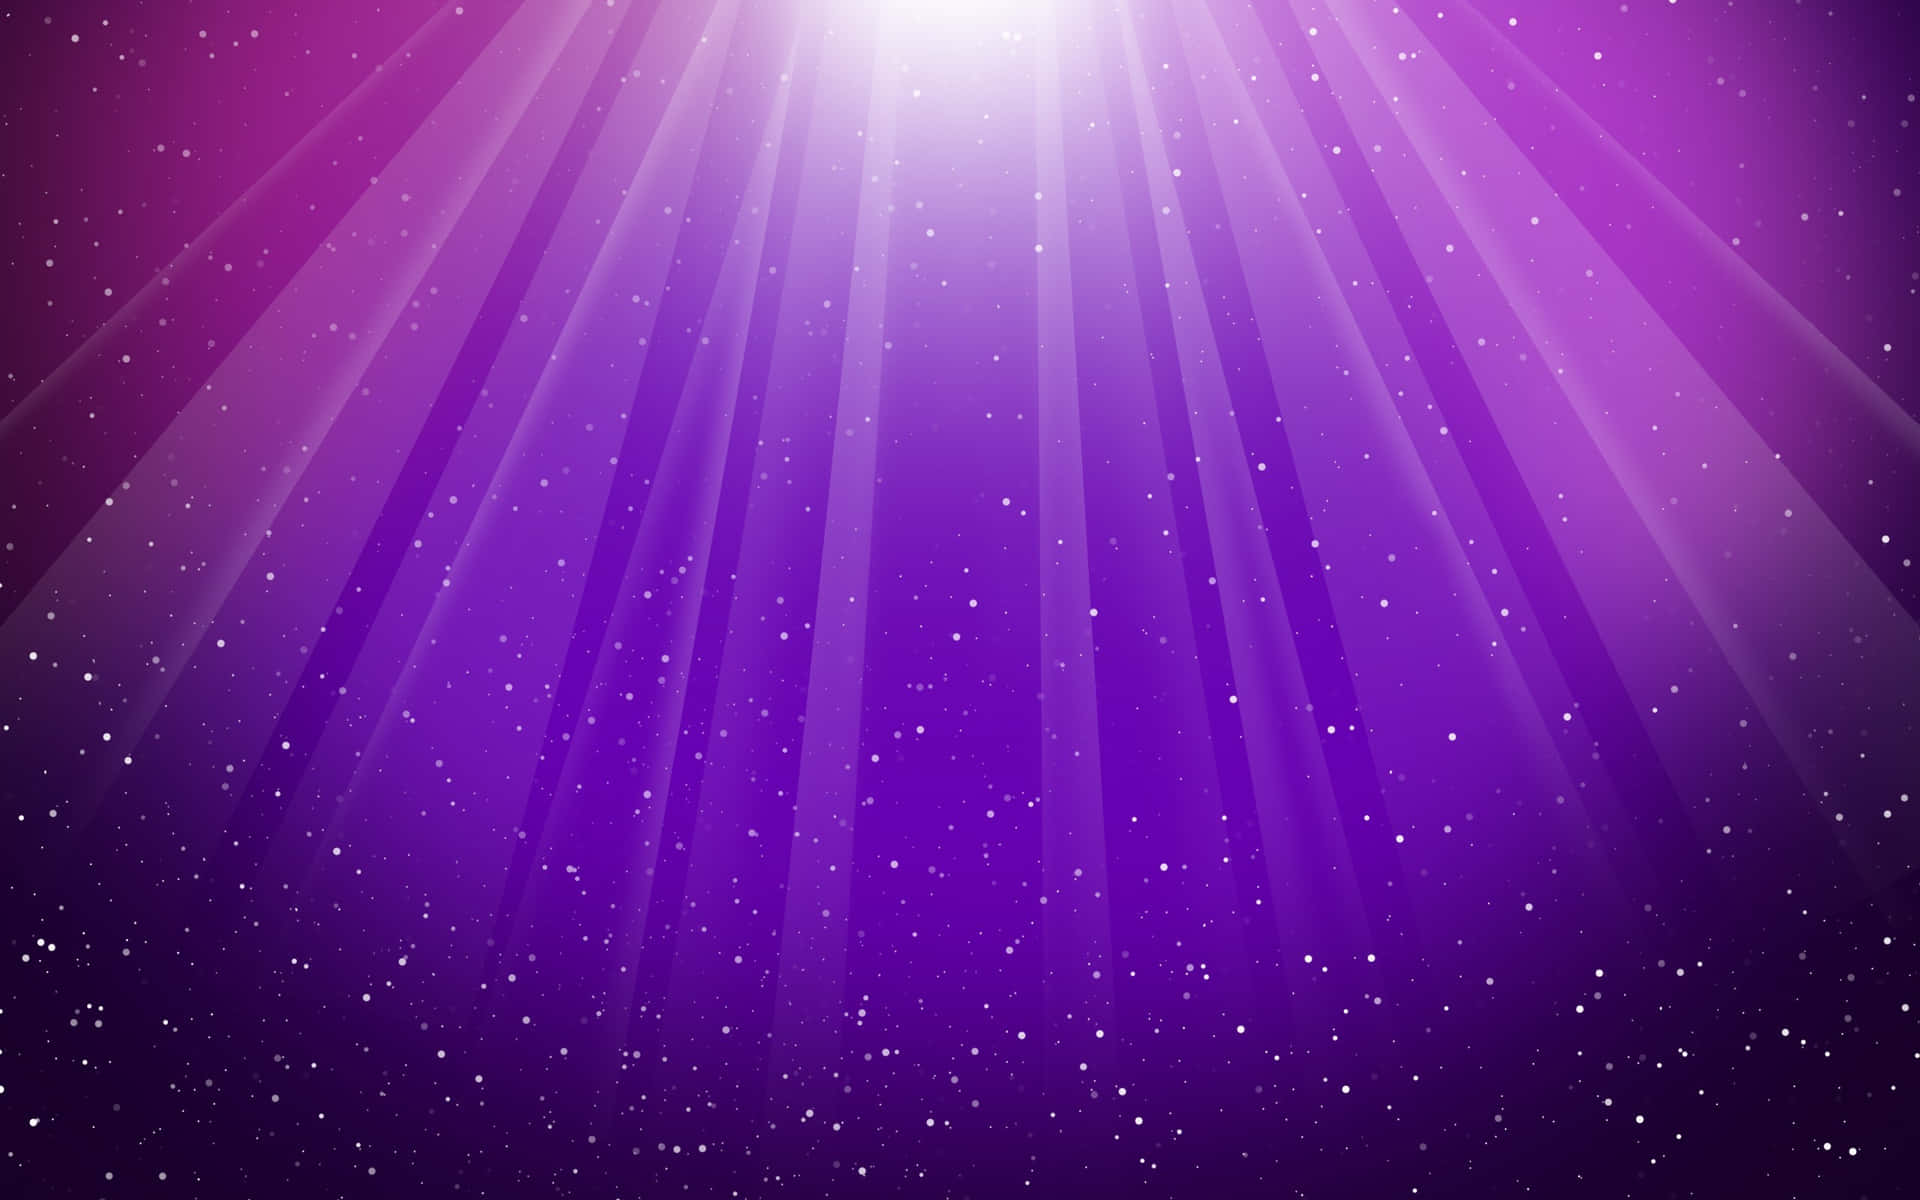 "Explore the distant beauty of Purple Galaxy"